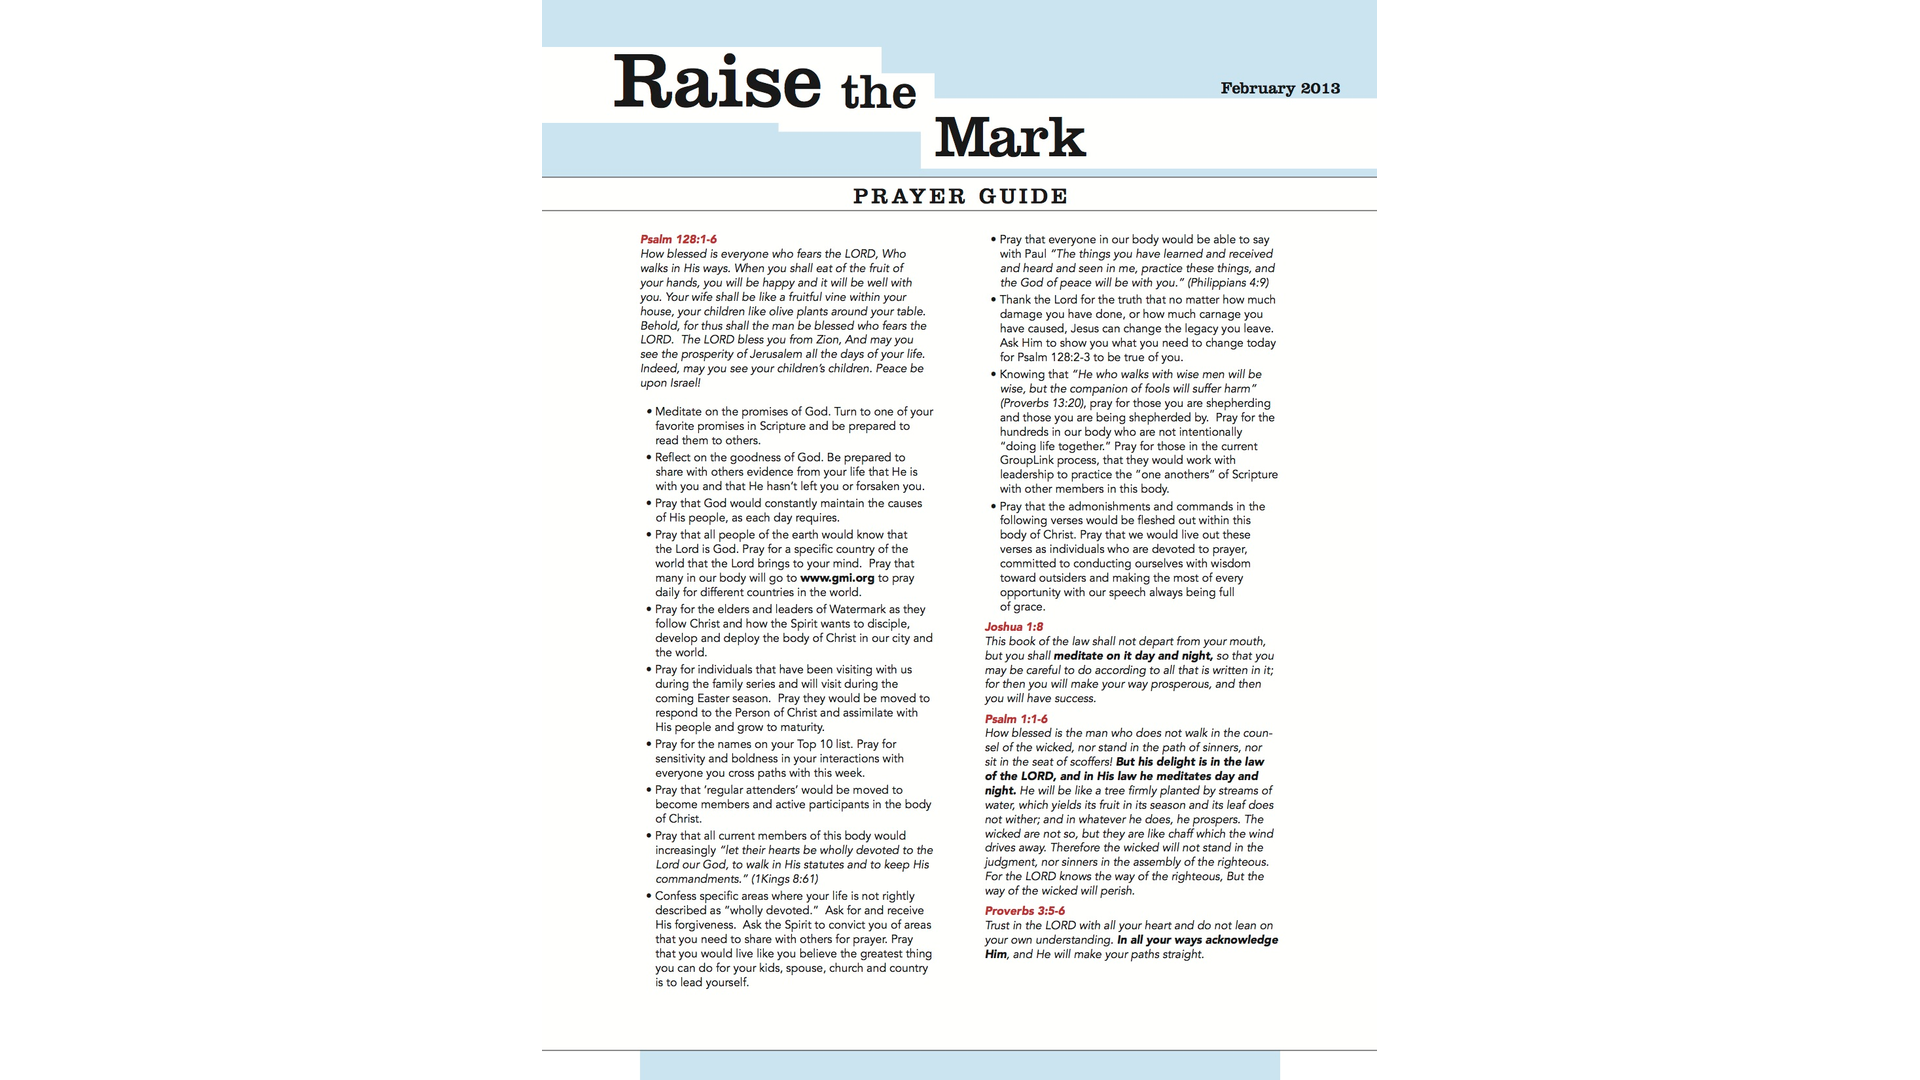 Download The Raise The Mark Prayer Guide From February 2013 Hero Image